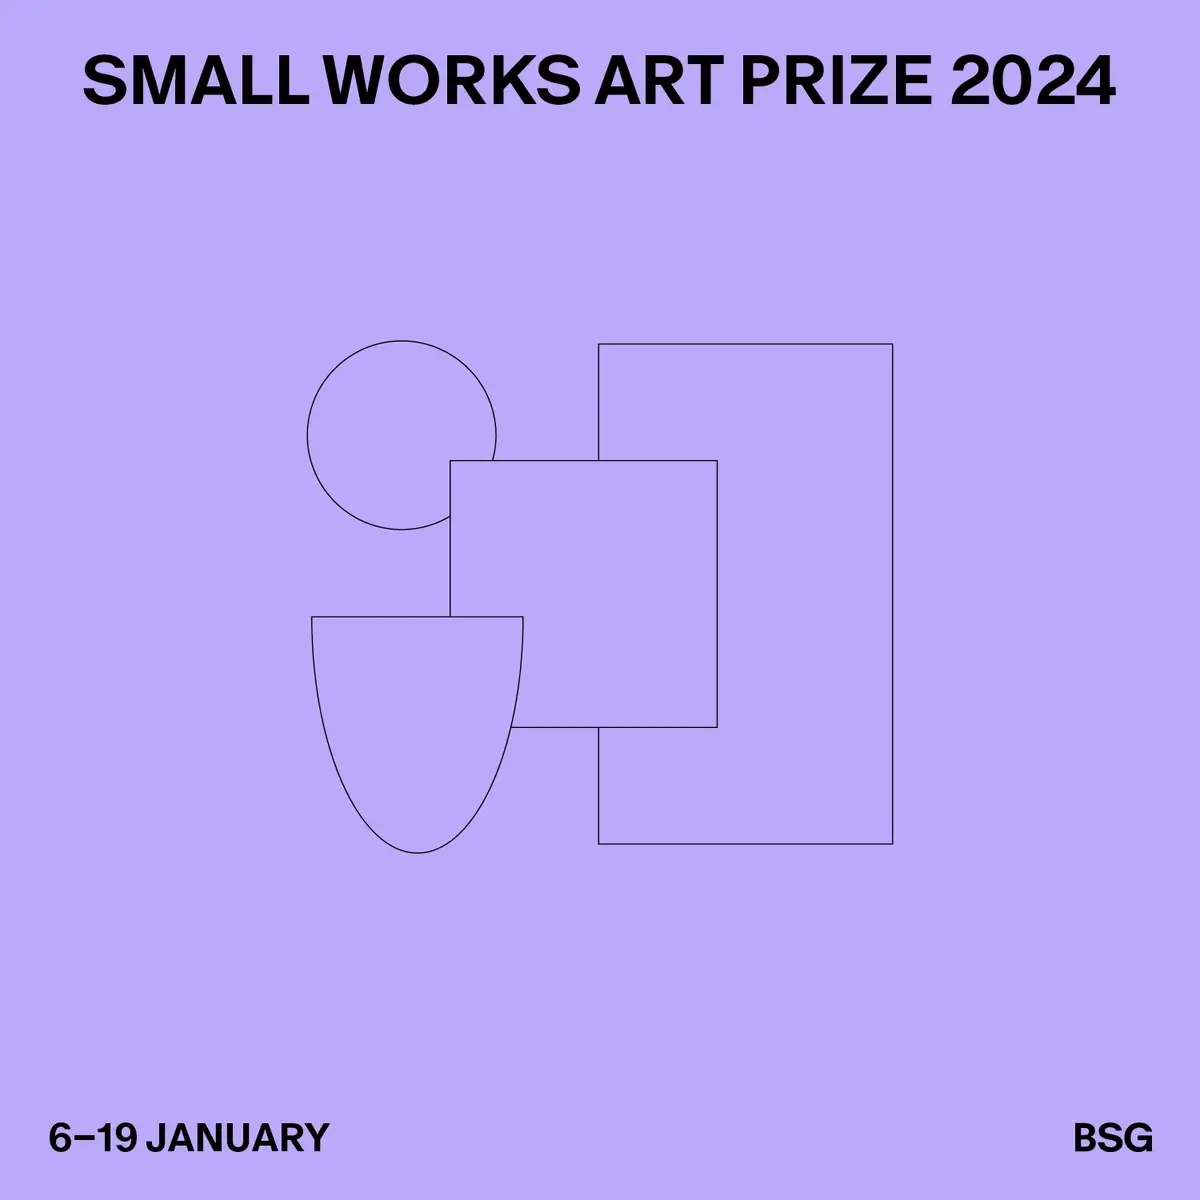 Small Works Art Prize